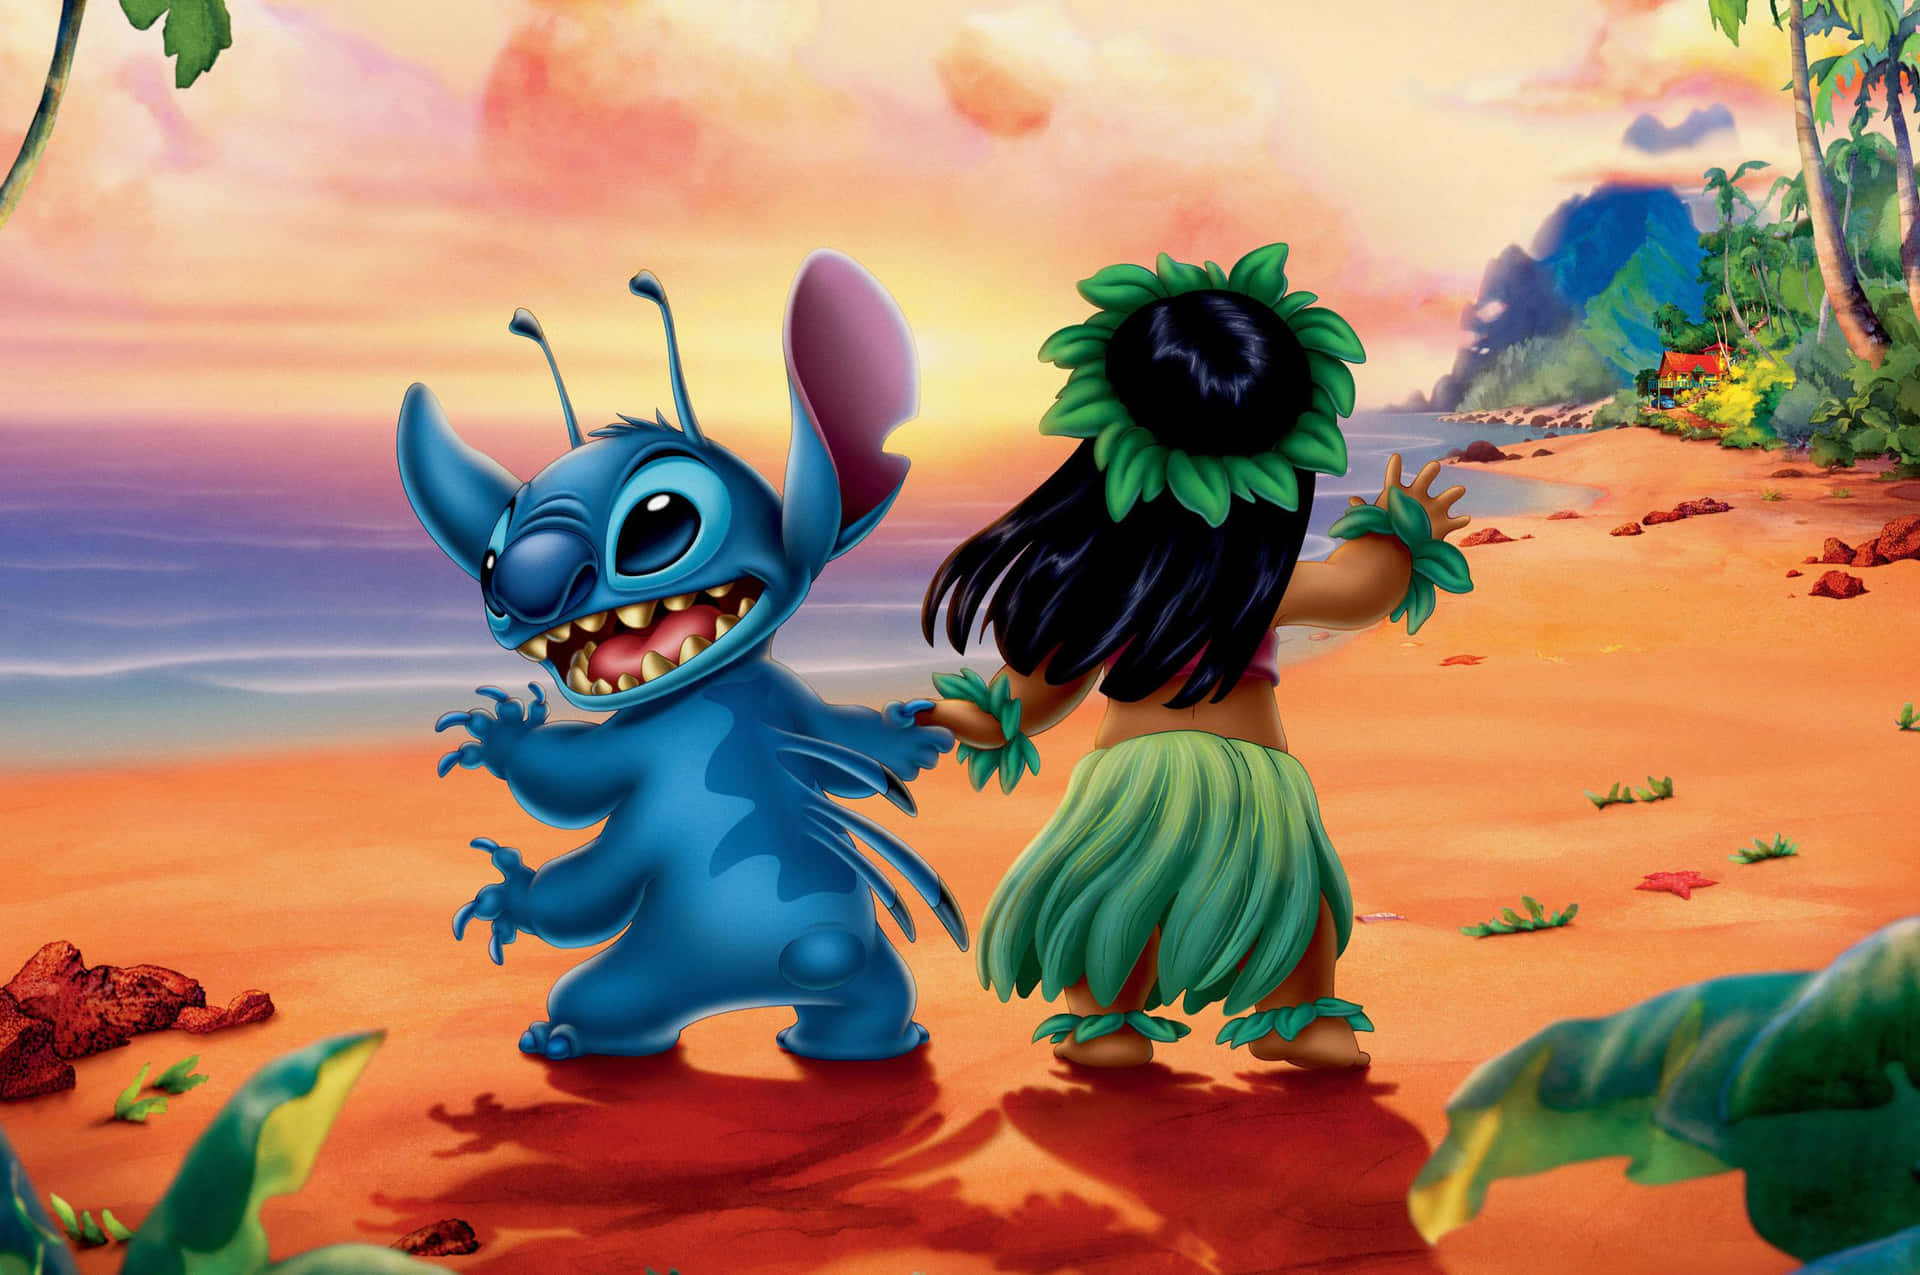 Cute Stitch waits for you at the Disney Park Wallpaper